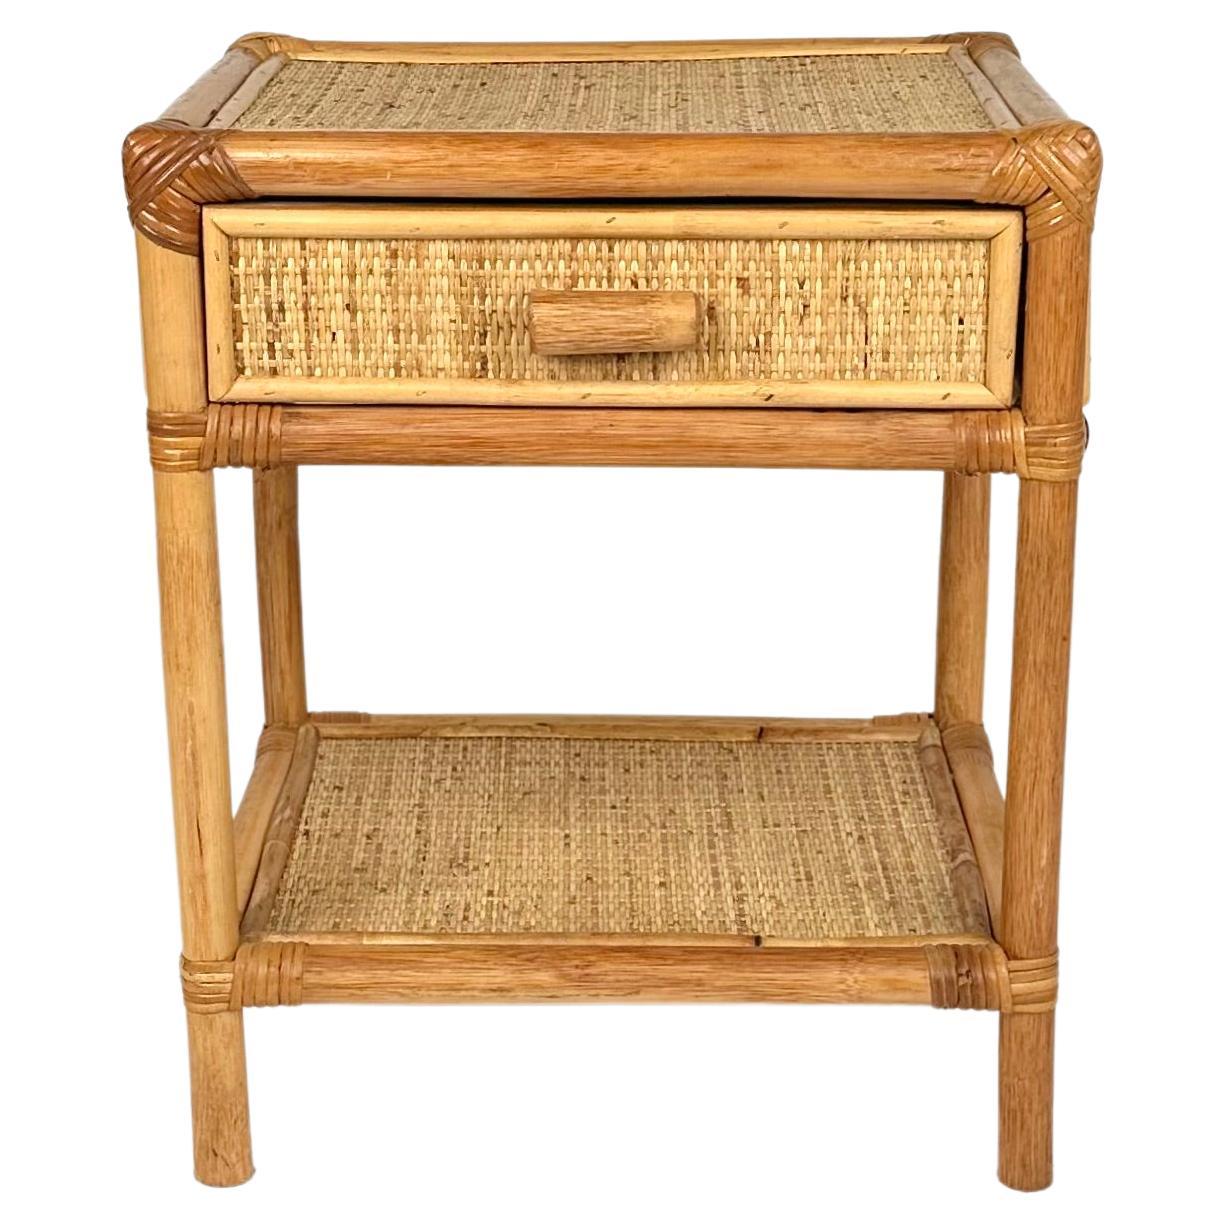 Mid-Century Modern Midcentury Bedside Table Nightstand in Bamboo & Rattan, Italy, 1970s For Sale